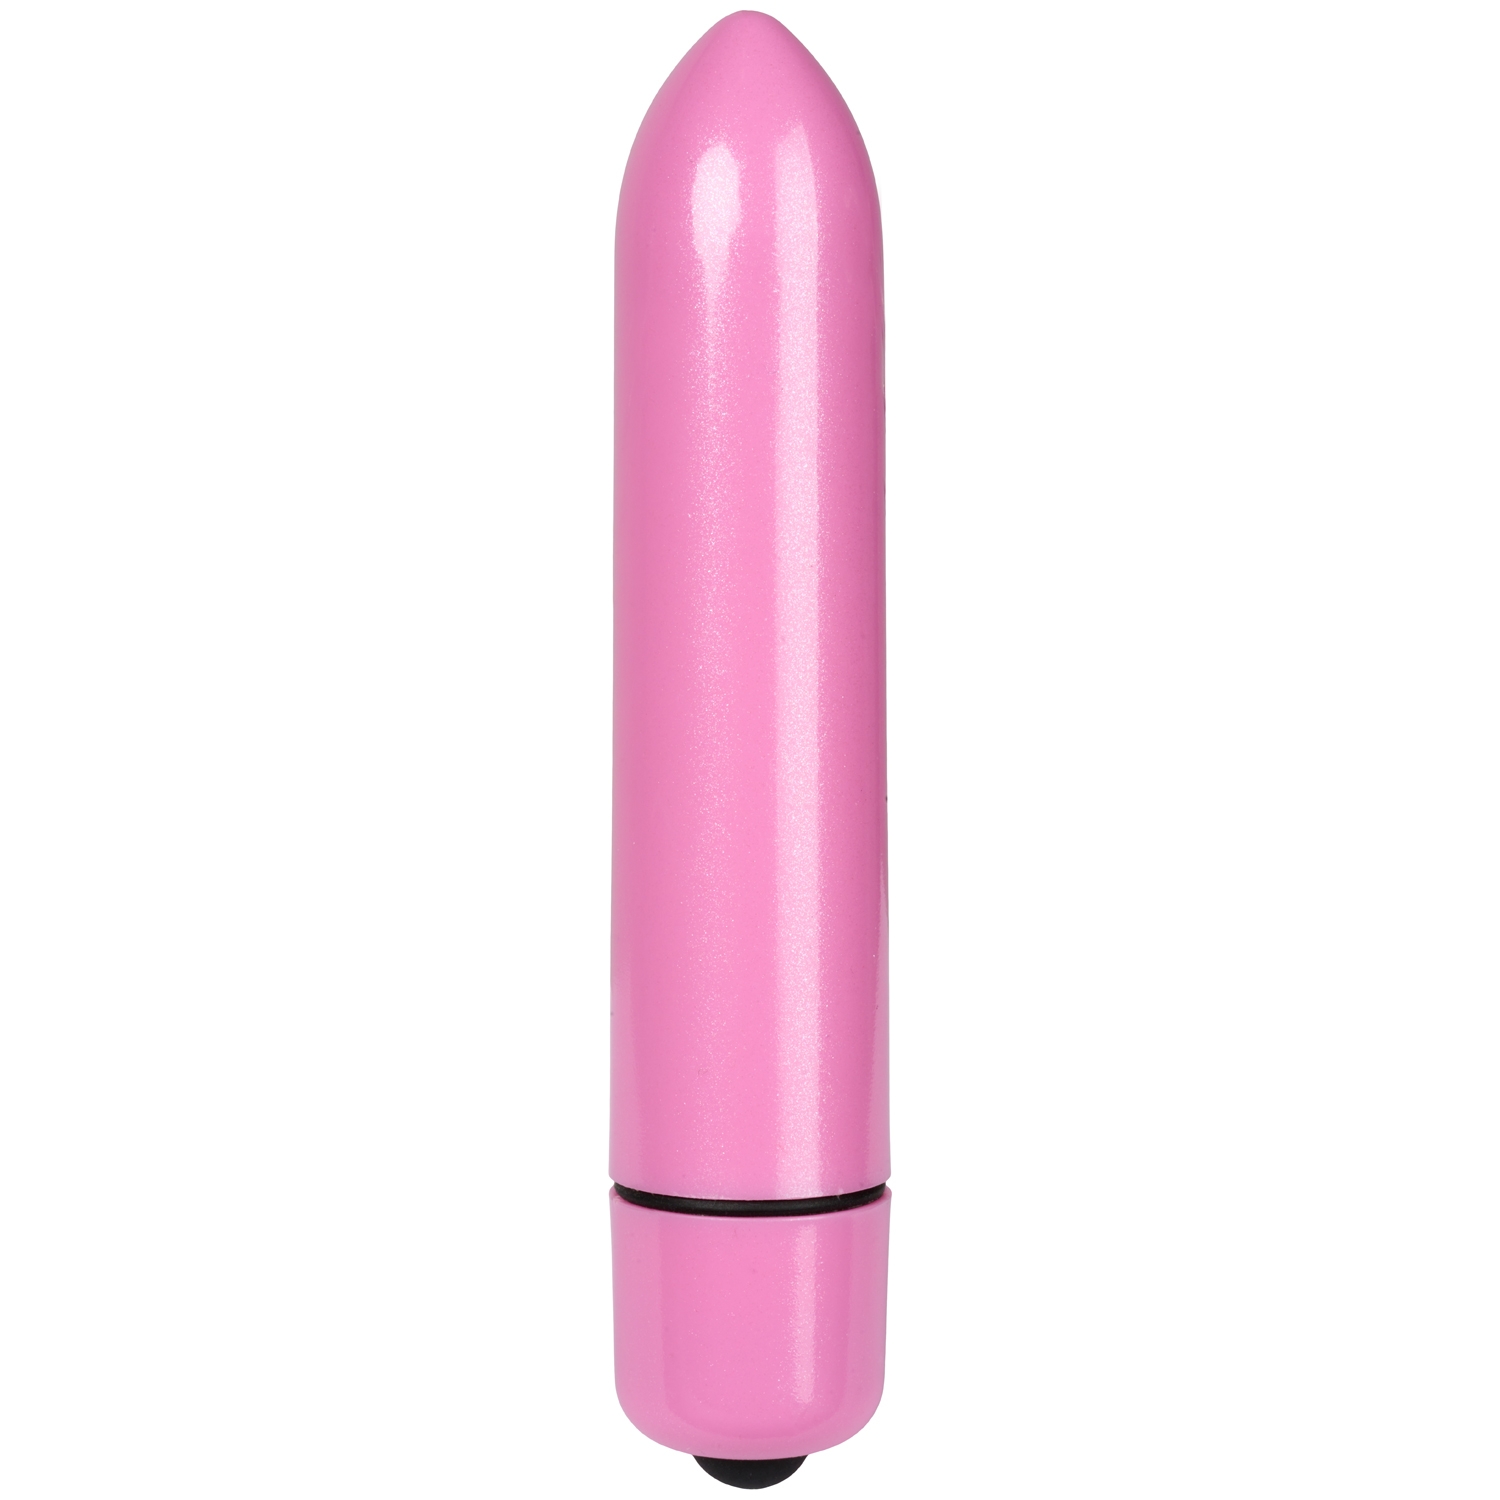 baseks Pearly Vibes Bullet Vibrator - Pink